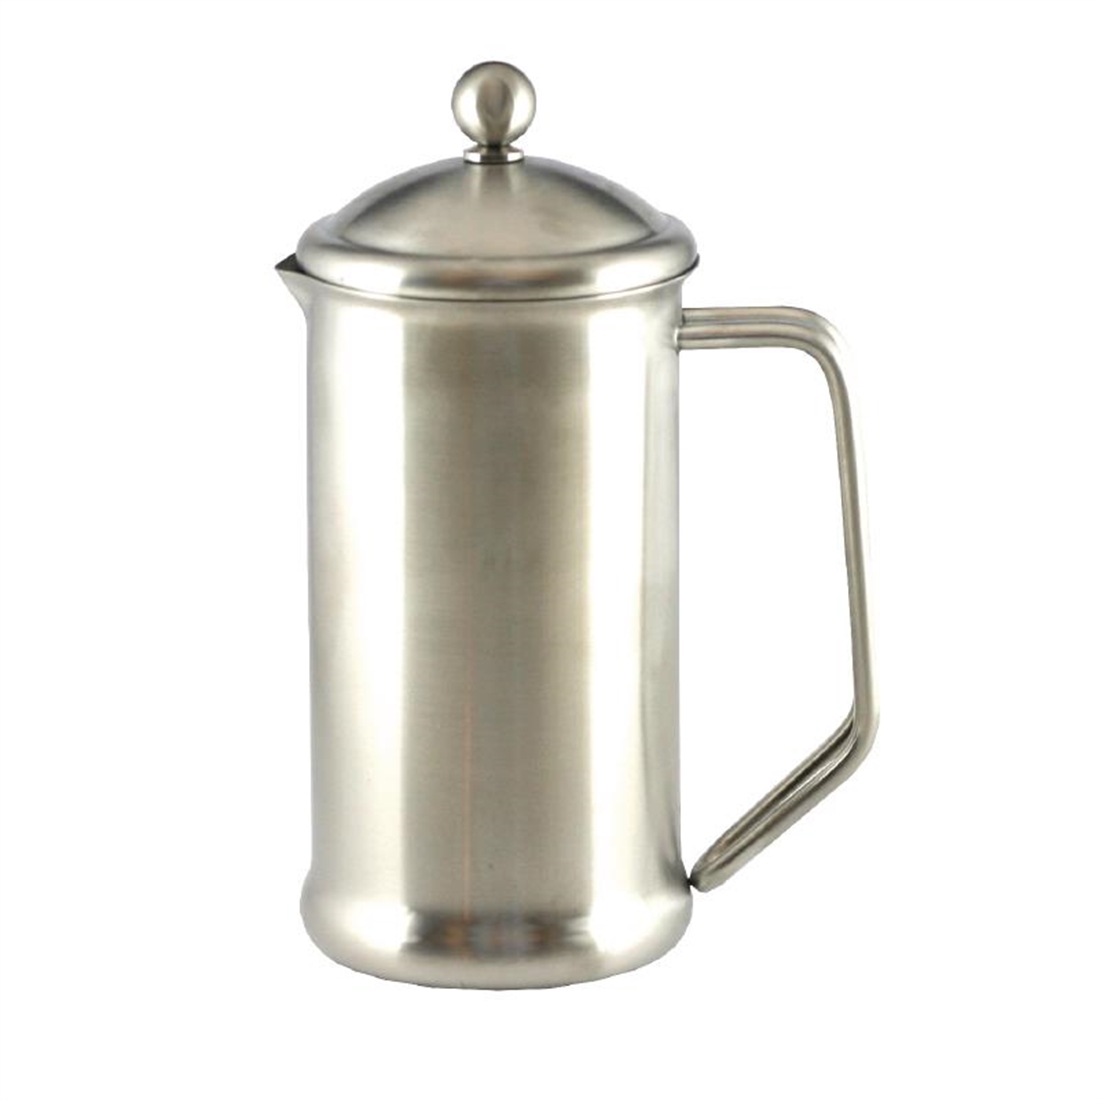 Cafetiere Stainless Steel Satin Finish 3 Cup